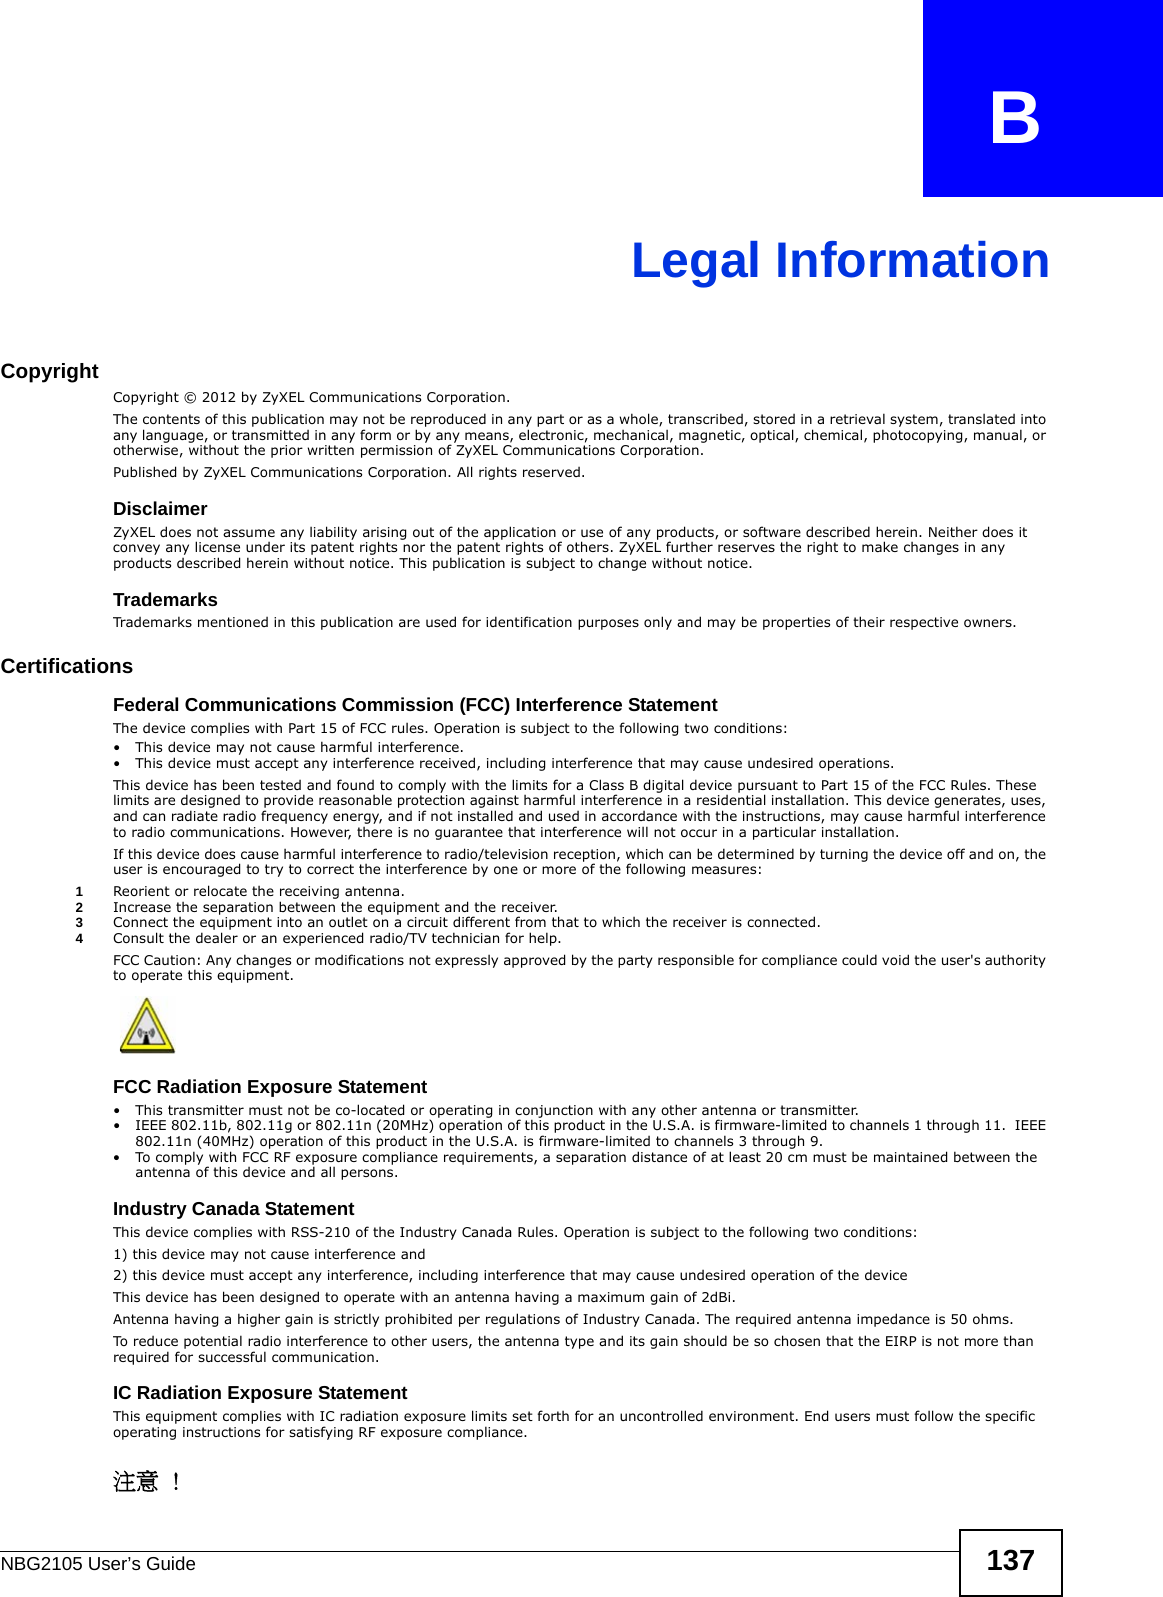 NBG2105 User’s Guide 137APPENDIX   BLegal InformationCopyrightCopyright © 2012 by ZyXEL Communications Corporation.The contents of this publication may not be reproduced in any part or as a whole, transcribed, stored in a retrieval system, translated into any language, or transmitted in any form or by any means, electronic, mechanical, magnetic, optical, chemical, photocopying, manual, or otherwise, without the prior written permission of ZyXEL Communications Corporation.Published by ZyXEL Communications Corporation. All rights reserved.DisclaimerZyXEL does not assume any liability arising out of the application or use of any products, or software described herein. Neither does it convey any license under its patent rights nor the patent rights of others. ZyXEL further reserves the right to make changes in any products described herein without notice. This publication is subject to change without notice.TrademarksTrademarks mentioned in this publication are used for identification purposes only and may be properties of their respective owners.Certifications  Federal Communications Commission (FCC) Interference Statement The device complies with Part 15 of FCC rules. Operation is subject to the following two conditions:• This device may not cause harmful interference.• This device must accept any interference received, including interference that may cause undesired operations.This device has been tested and found to comply with the limits for a Class B digital device pursuant to Part 15 of the FCC Rules. These limits are designed to provide reasonable protection against harmful interference in a residential installation. This device generates, uses, and can radiate radio frequency energy, and if not installed and used in accordance with the instructions, may cause harmful interference to radio communications. However, there is no guarantee that interference will not occur in a particular installation.If this device does cause harmful interference to radio/television reception, which can be determined by turning the device off and on, the user is encouraged to try to correct the interference by one or more of the following measures:1Reorient or relocate the receiving antenna.2Increase the separation between the equipment and the receiver.3Connect the equipment into an outlet on a circuit different from that to which the receiver is connected.4Consult the dealer or an experienced radio/TV technician for help.FCC Caution: Any changes or modifications not expressly approved by the party responsible for compliance could void the user&apos;s authority to operate this equipment.FCC Radiation Exposure Statement • This transmitter must not be co-located or operating in conjunction with any other antenna or transmitter. • IEEE 802.11b, 802.11g or 802.11n (20MHz) operation of this product in the U.S.A. is firmware-limited to channels 1 through 11.  IEEE 802.11n (40MHz) operation of this product in the U.S.A. is firmware-limited to channels 3 through 9.• To comply with FCC RF exposure compliance requirements, a separation distance of at least 20 cm must be maintained between the antenna of this device and all persons. Industry Canada StatementThis device complies with RSS-210 of the Industry Canada Rules. Operation is subject to the following two conditions:1) this device may not cause interference and2) this device must accept any interference, including interference that may cause undesired operation of the deviceThis device has been designed to operate with an antenna having a maximum gain of 2dBi.Antenna having a higher gain is strictly prohibited per regulations of Industry Canada. The required antenna impedance is 50 ohms.To reduce potential radio interference to other users, the antenna type and its gain should be so chosen that the EIRP is not more than required for successful communication.IC Radiation Exposure Statement This equipment complies with IC radiation exposure limits set forth for an uncontrolled environment. End users must follow the specific operating instructions for satisfying RF exposure compliance.注意 ! 